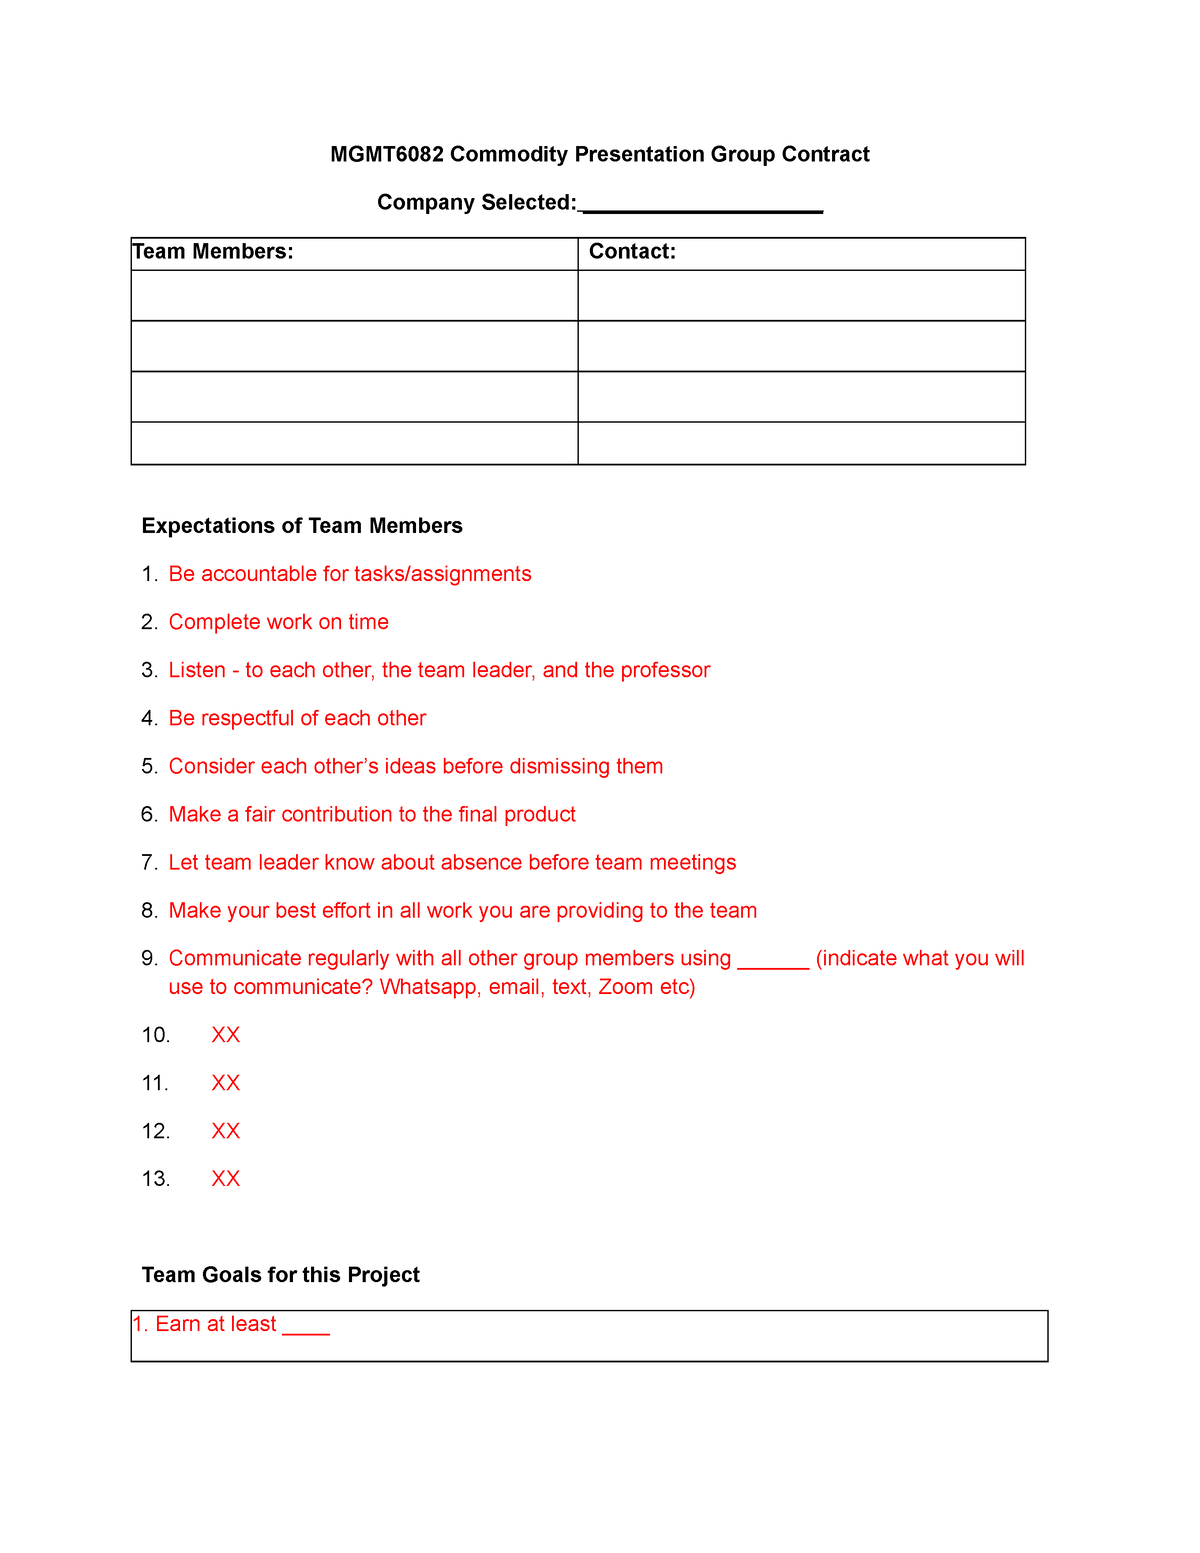 Group Contract Template MGMT6082 Commodity Presentation Group